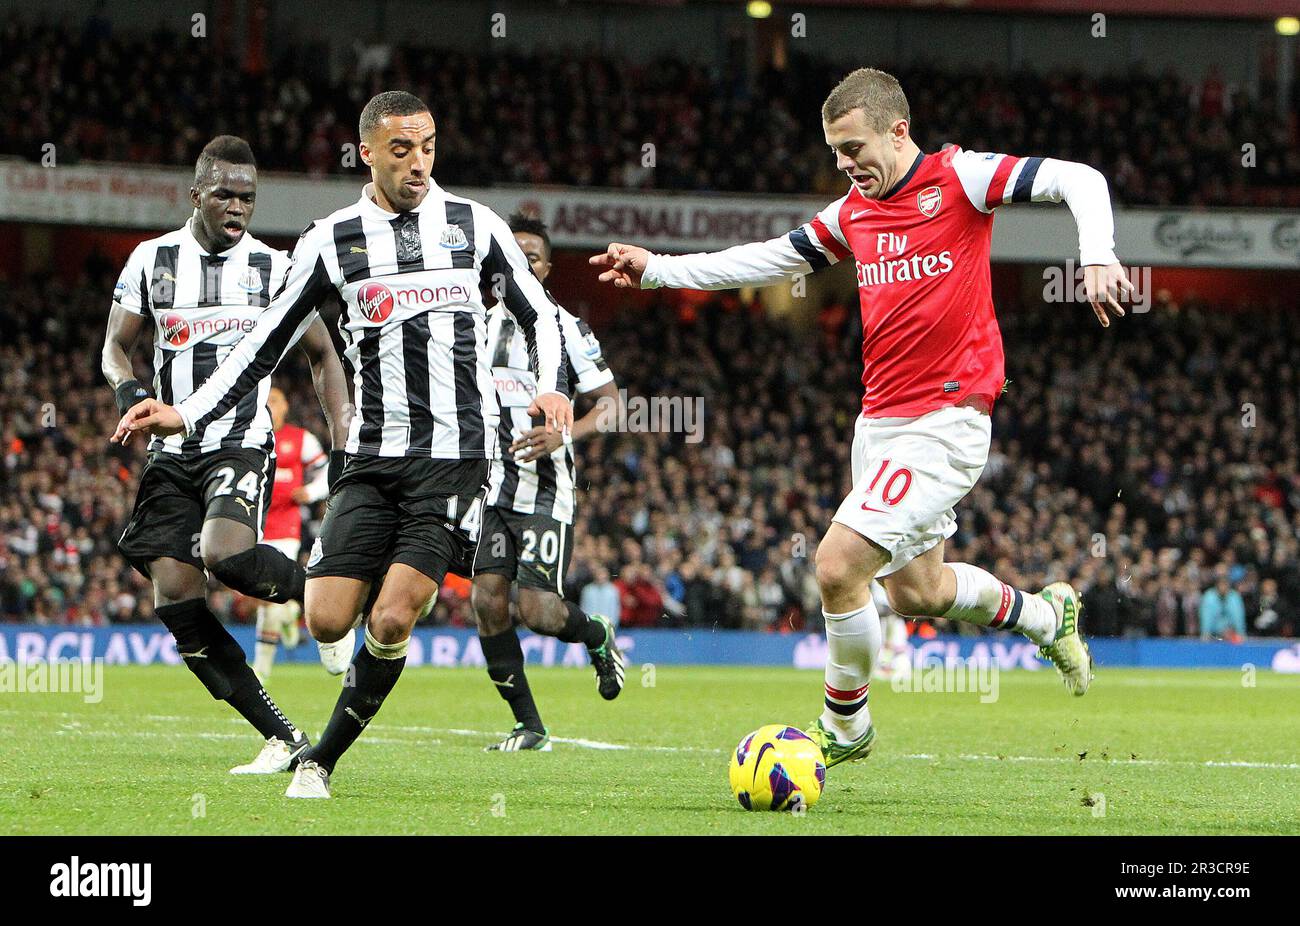 Arsenal's Jack Wilshere in action during todays match. Arsenal beat Newcastle 7:3Arsenal 29/12/12 Arsenal V Newcastle United 29/12/12 The Premier Leag Stock Photo